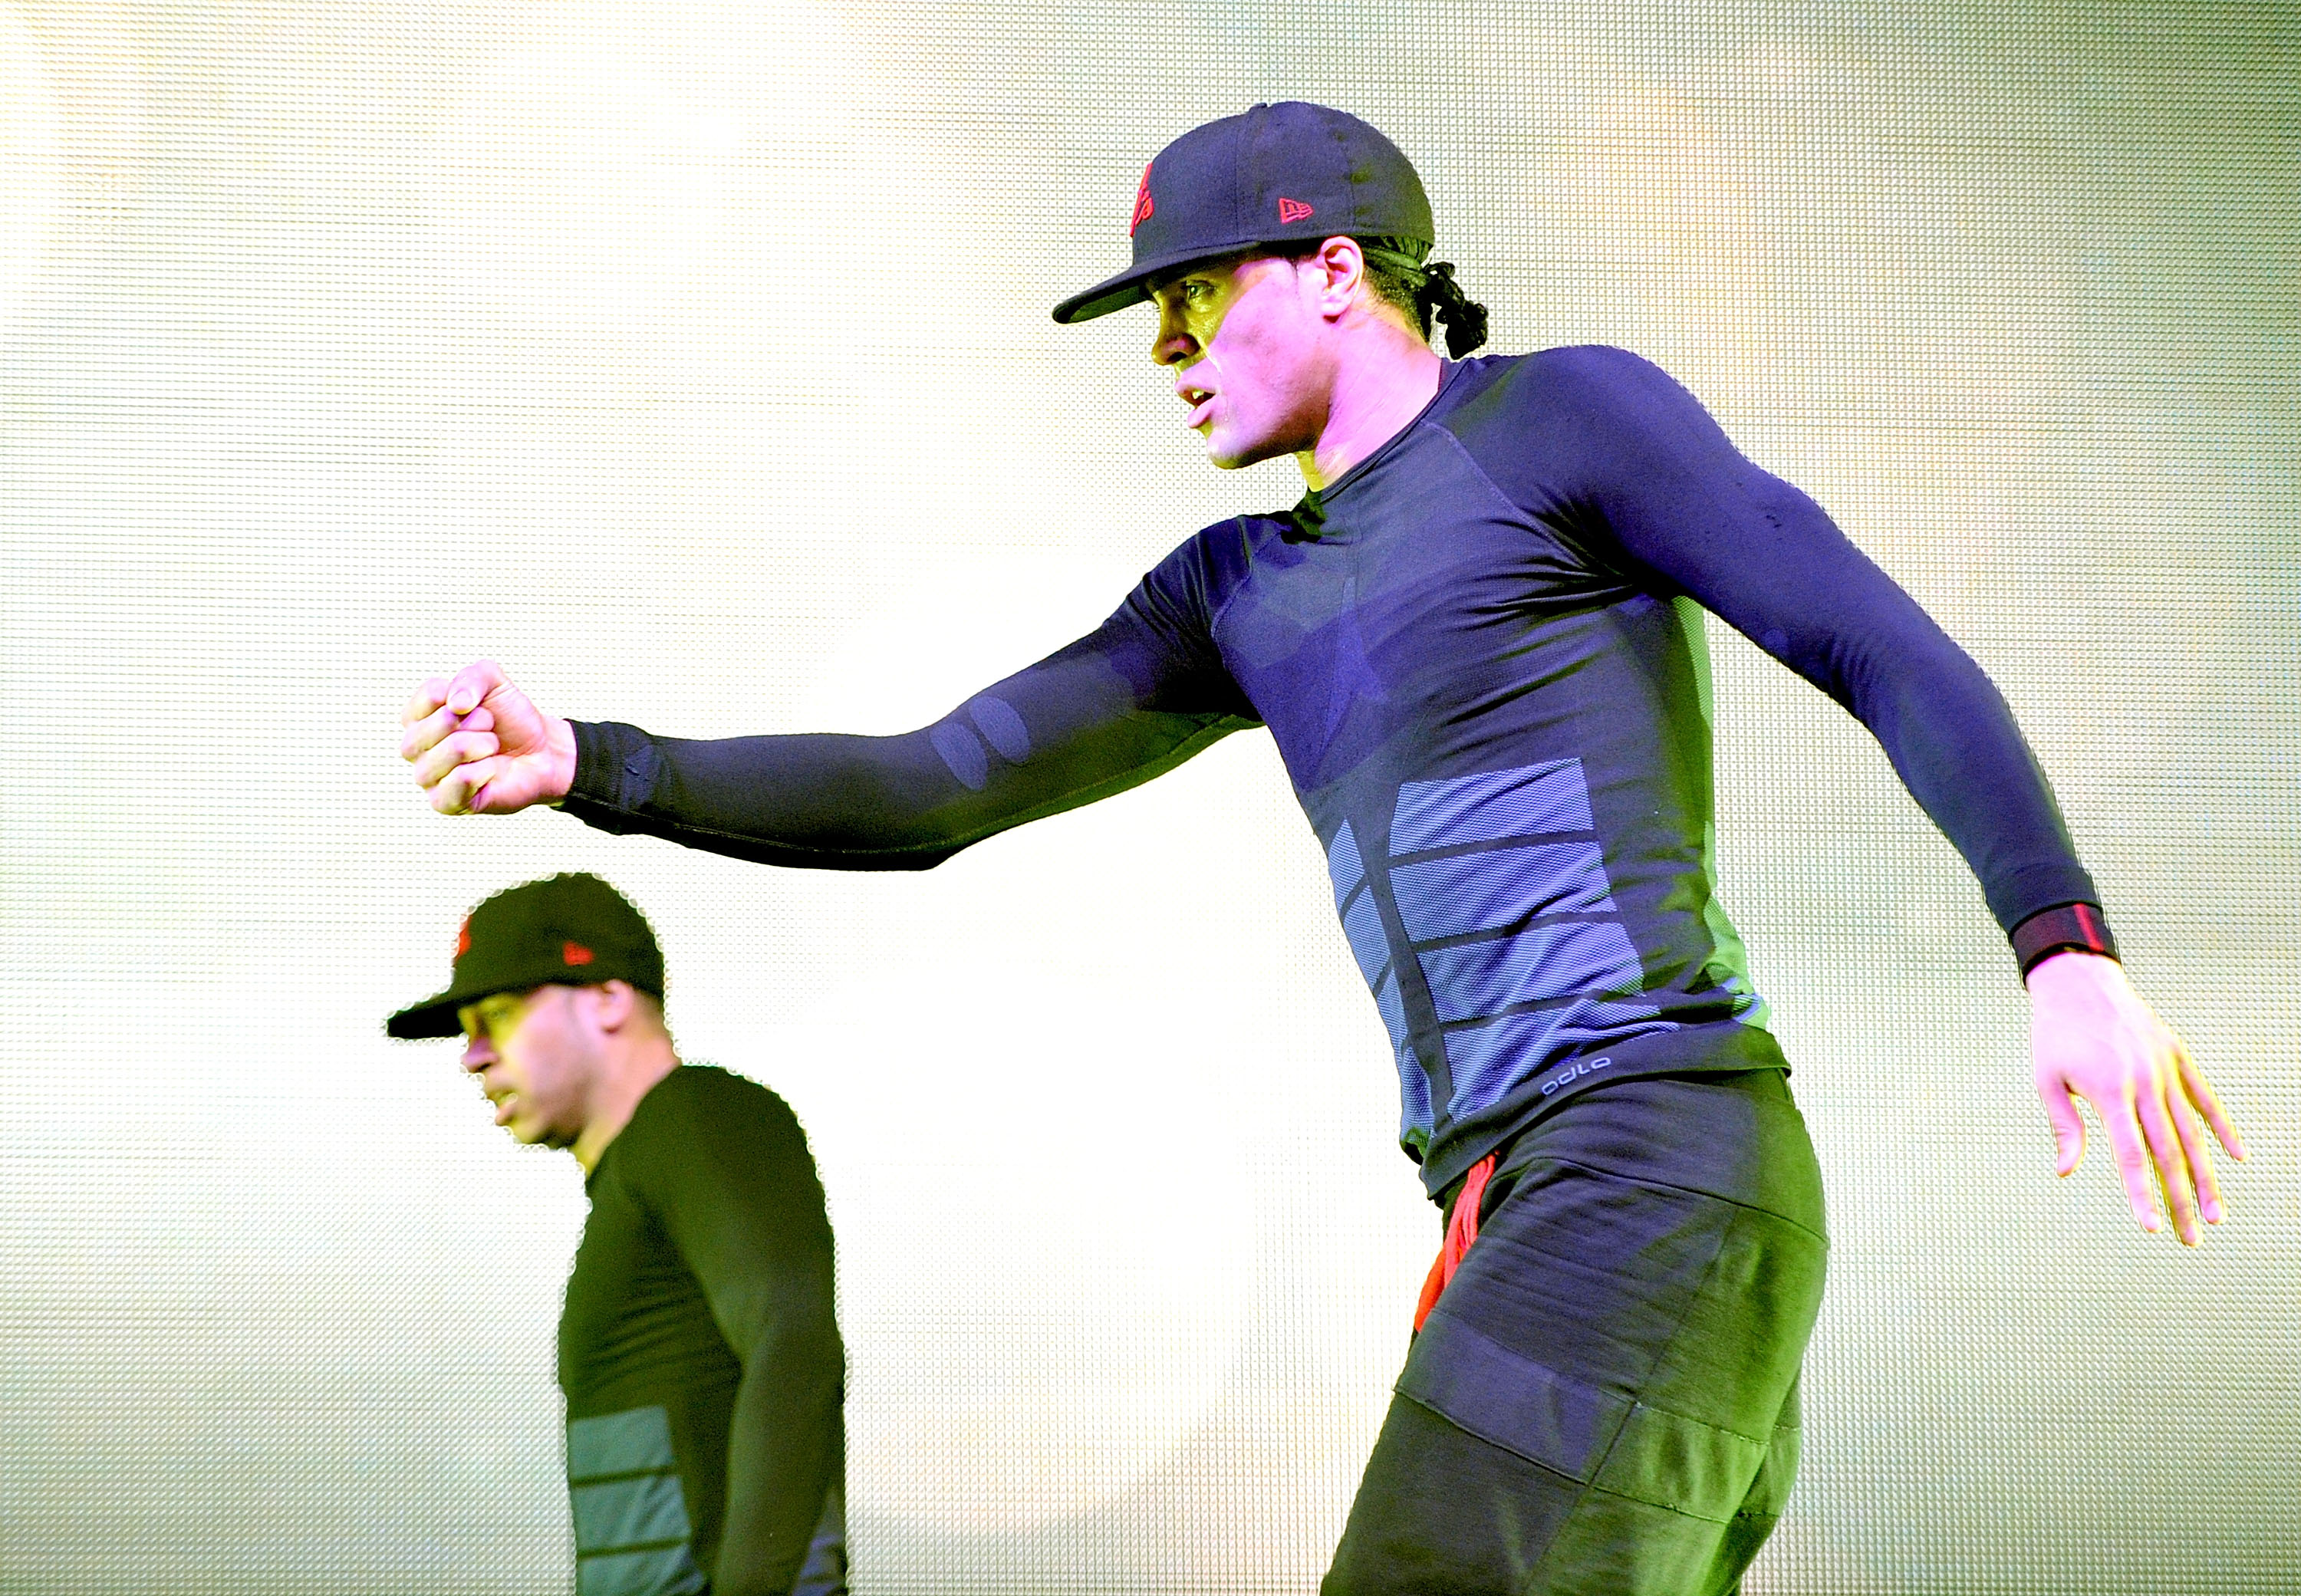 MANCHESTER, ENGLAND - APRIL 09:  (EXCLUSIVE COVERAGE) Ashley Banjo of dance troupe Diversity performs at MEN Arena on April 9, 2012 in Manchester, England.  (Photo by Shirlaine Forrest/WireImage)